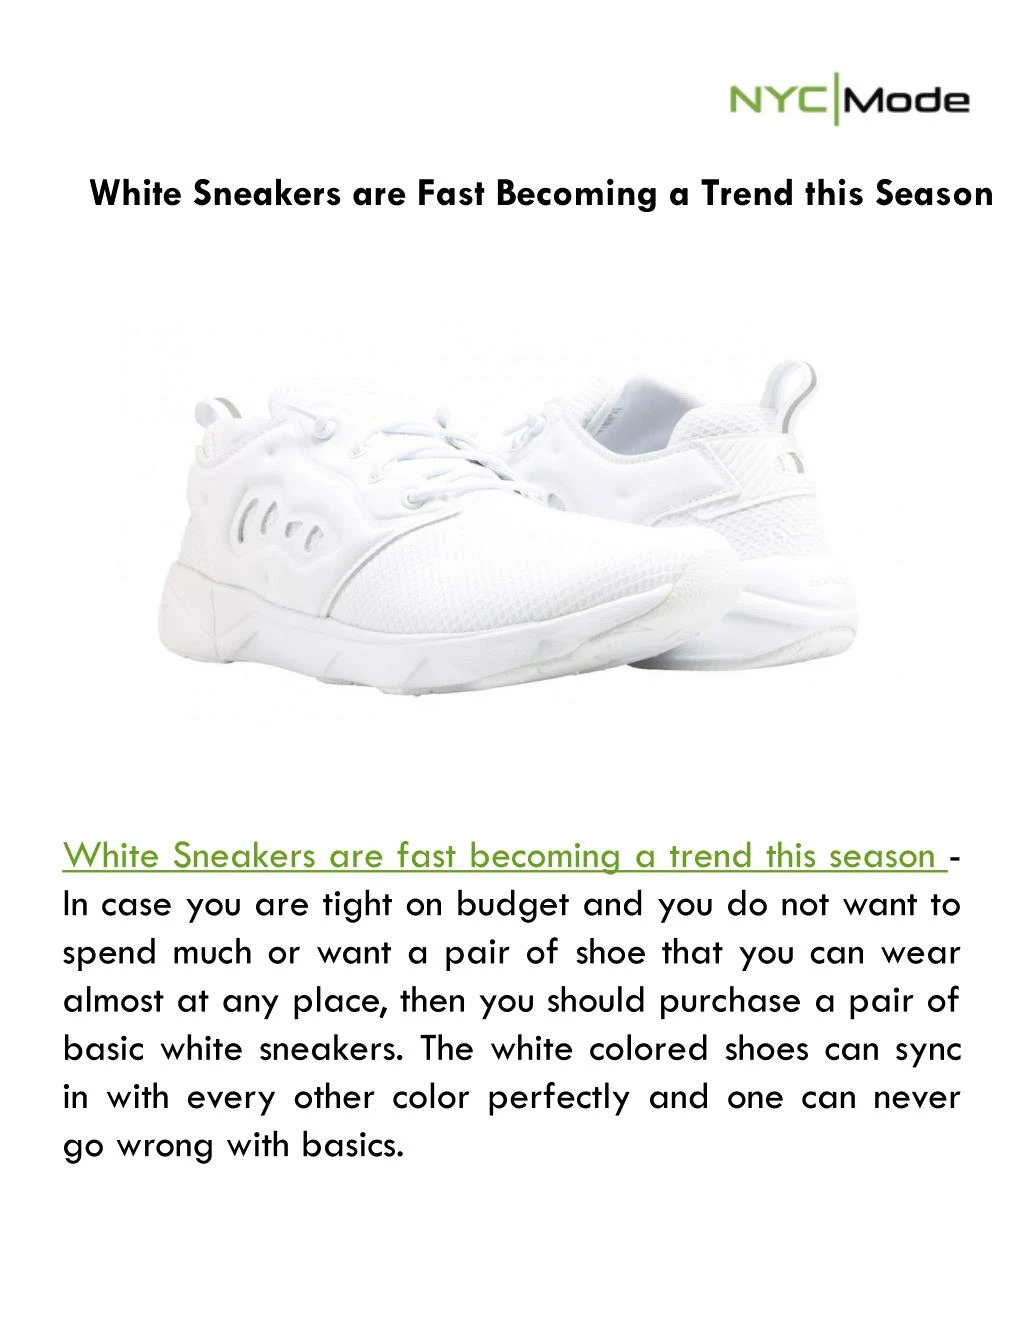 white sneakers are fast becoming a trend this